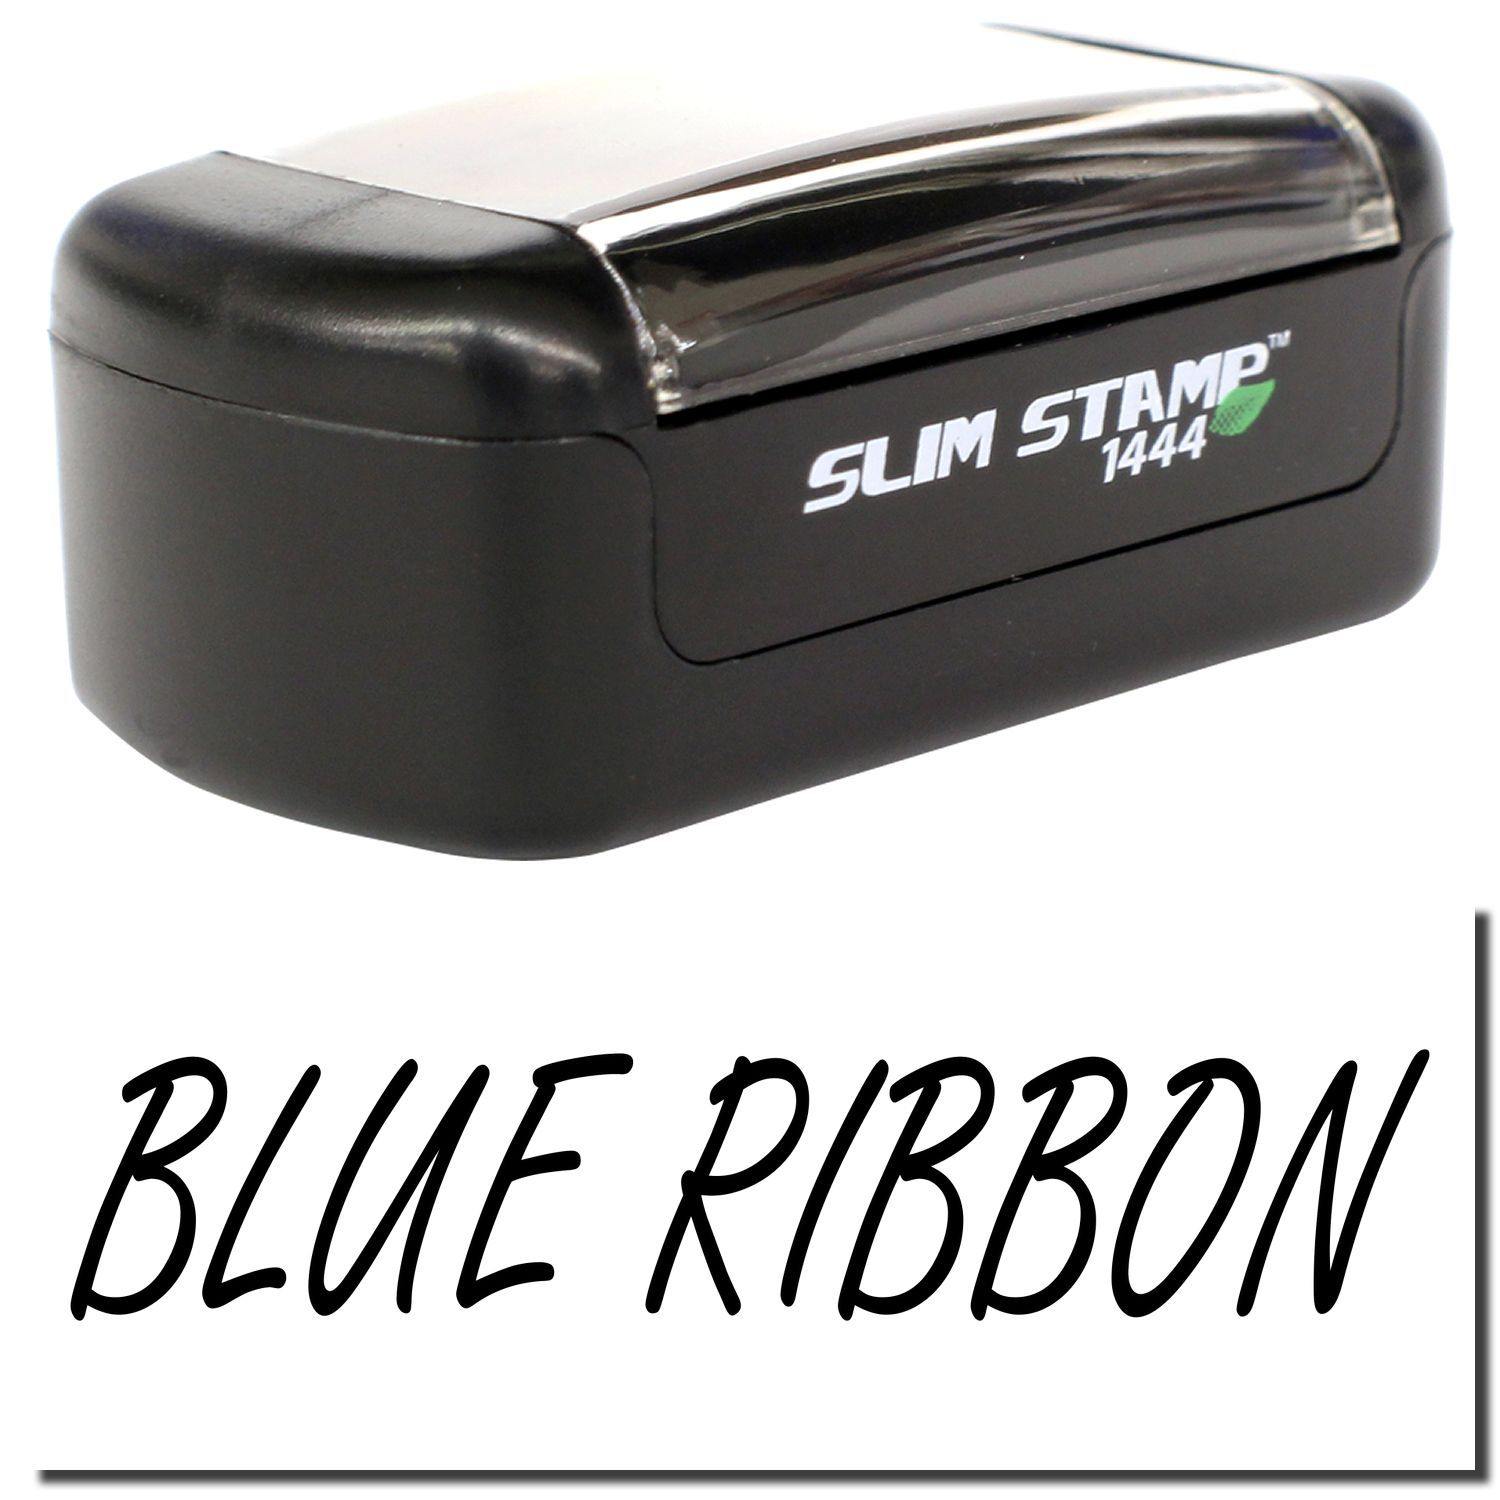 A stock office pre-inked stamp with a stamped image showing how the text "BLUE RIBBON" is displayed after stamping.